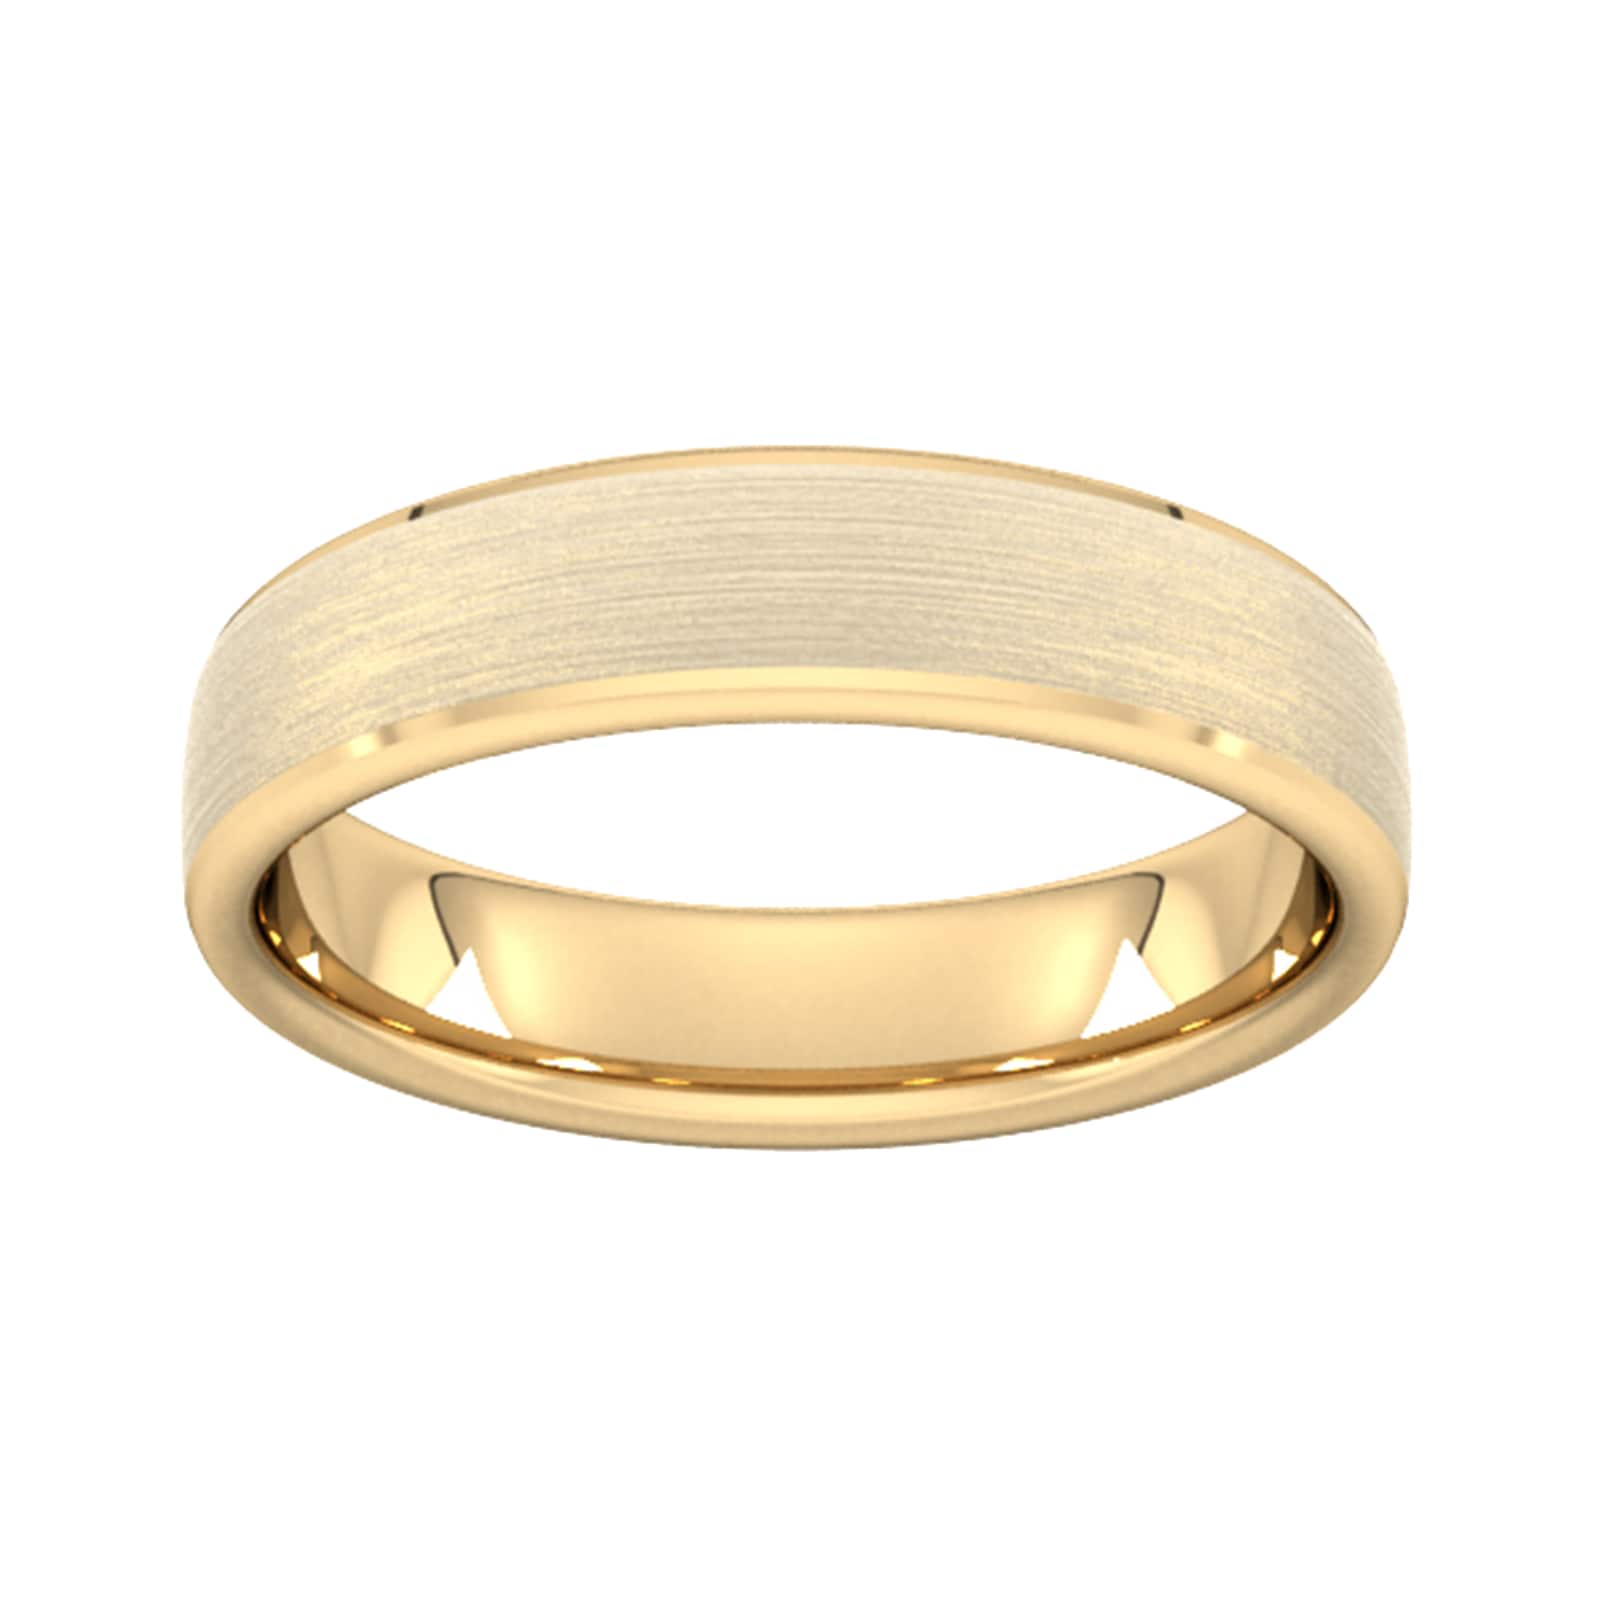 6mm Flat Court Heavy Polished Chamfered Edges With Matt Centre Wedding Ring In 9 Carat Yellow Gold - Ring Size J